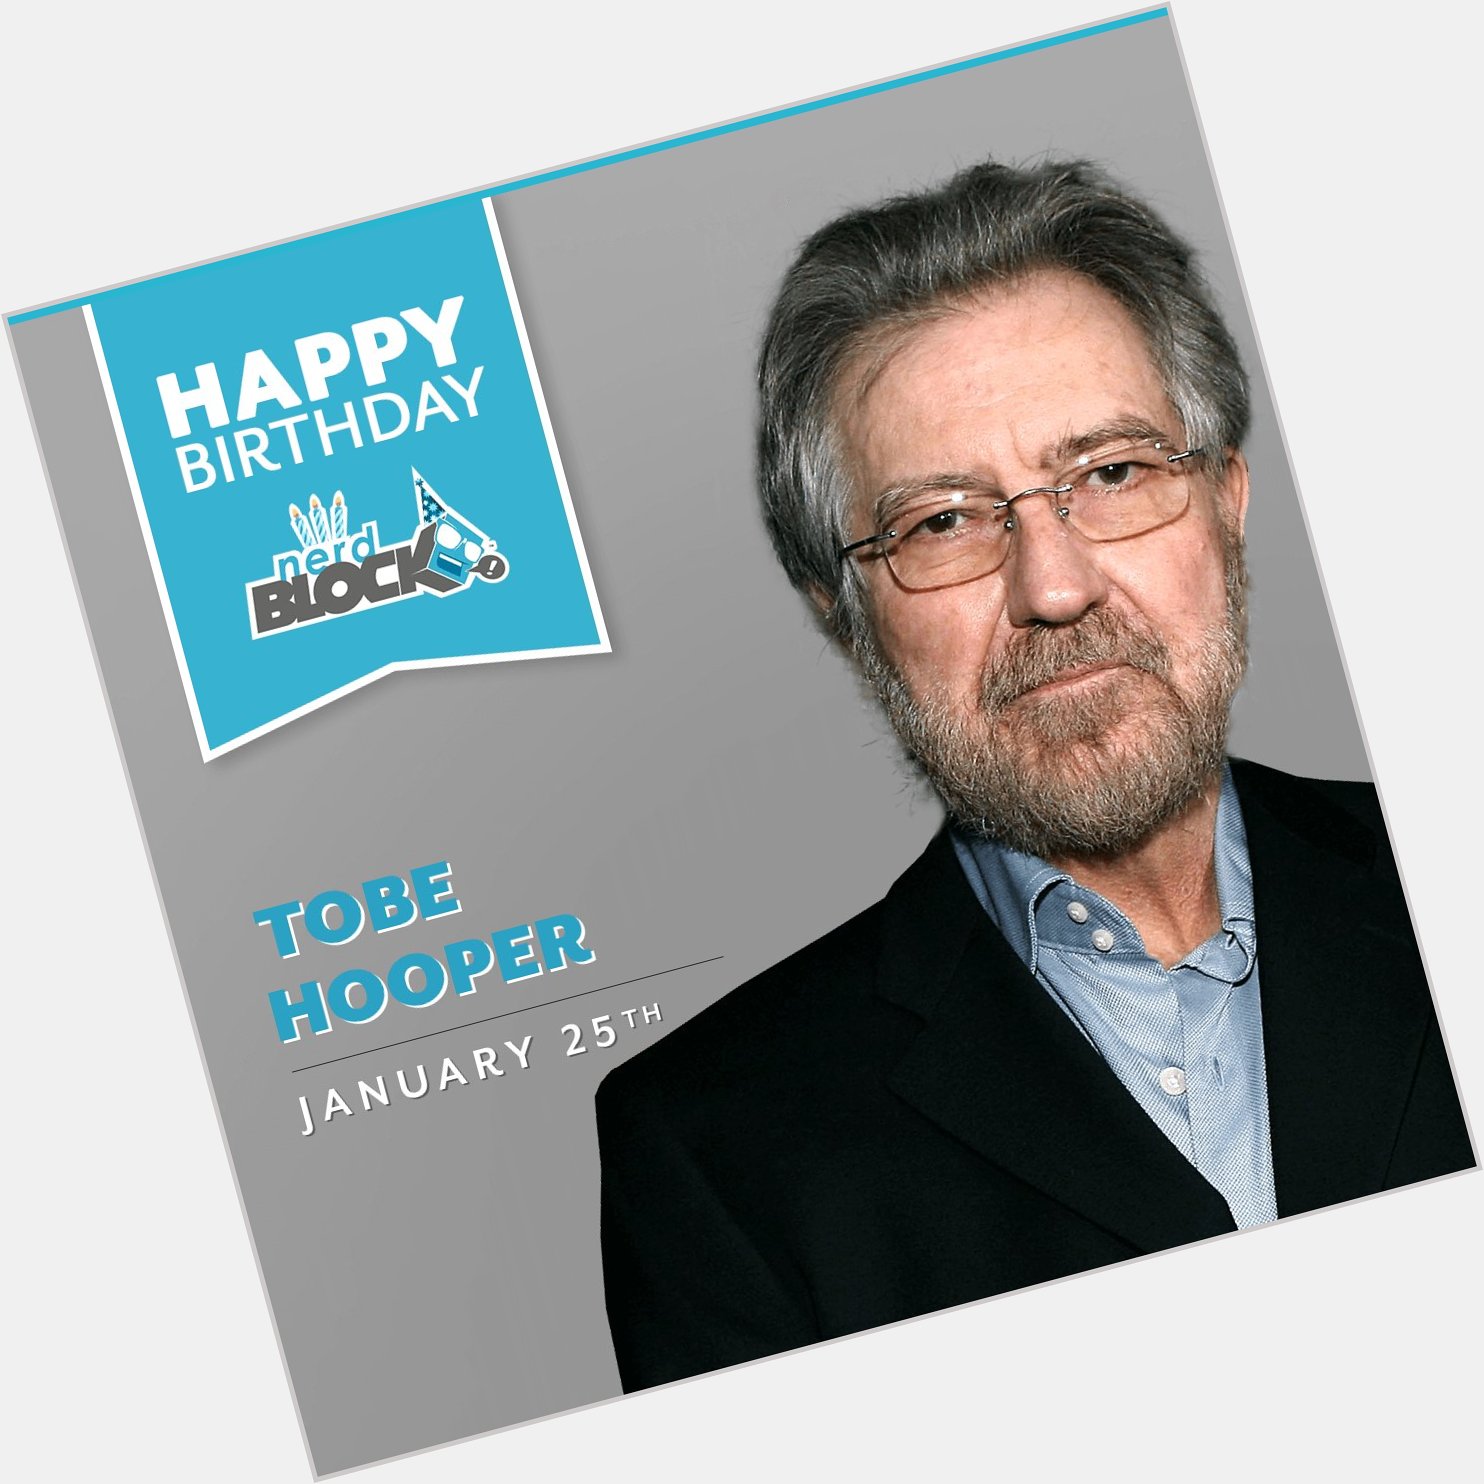 Happy birthday Tobe Hooper. The world of horror wouldn\t be complete without your films. 